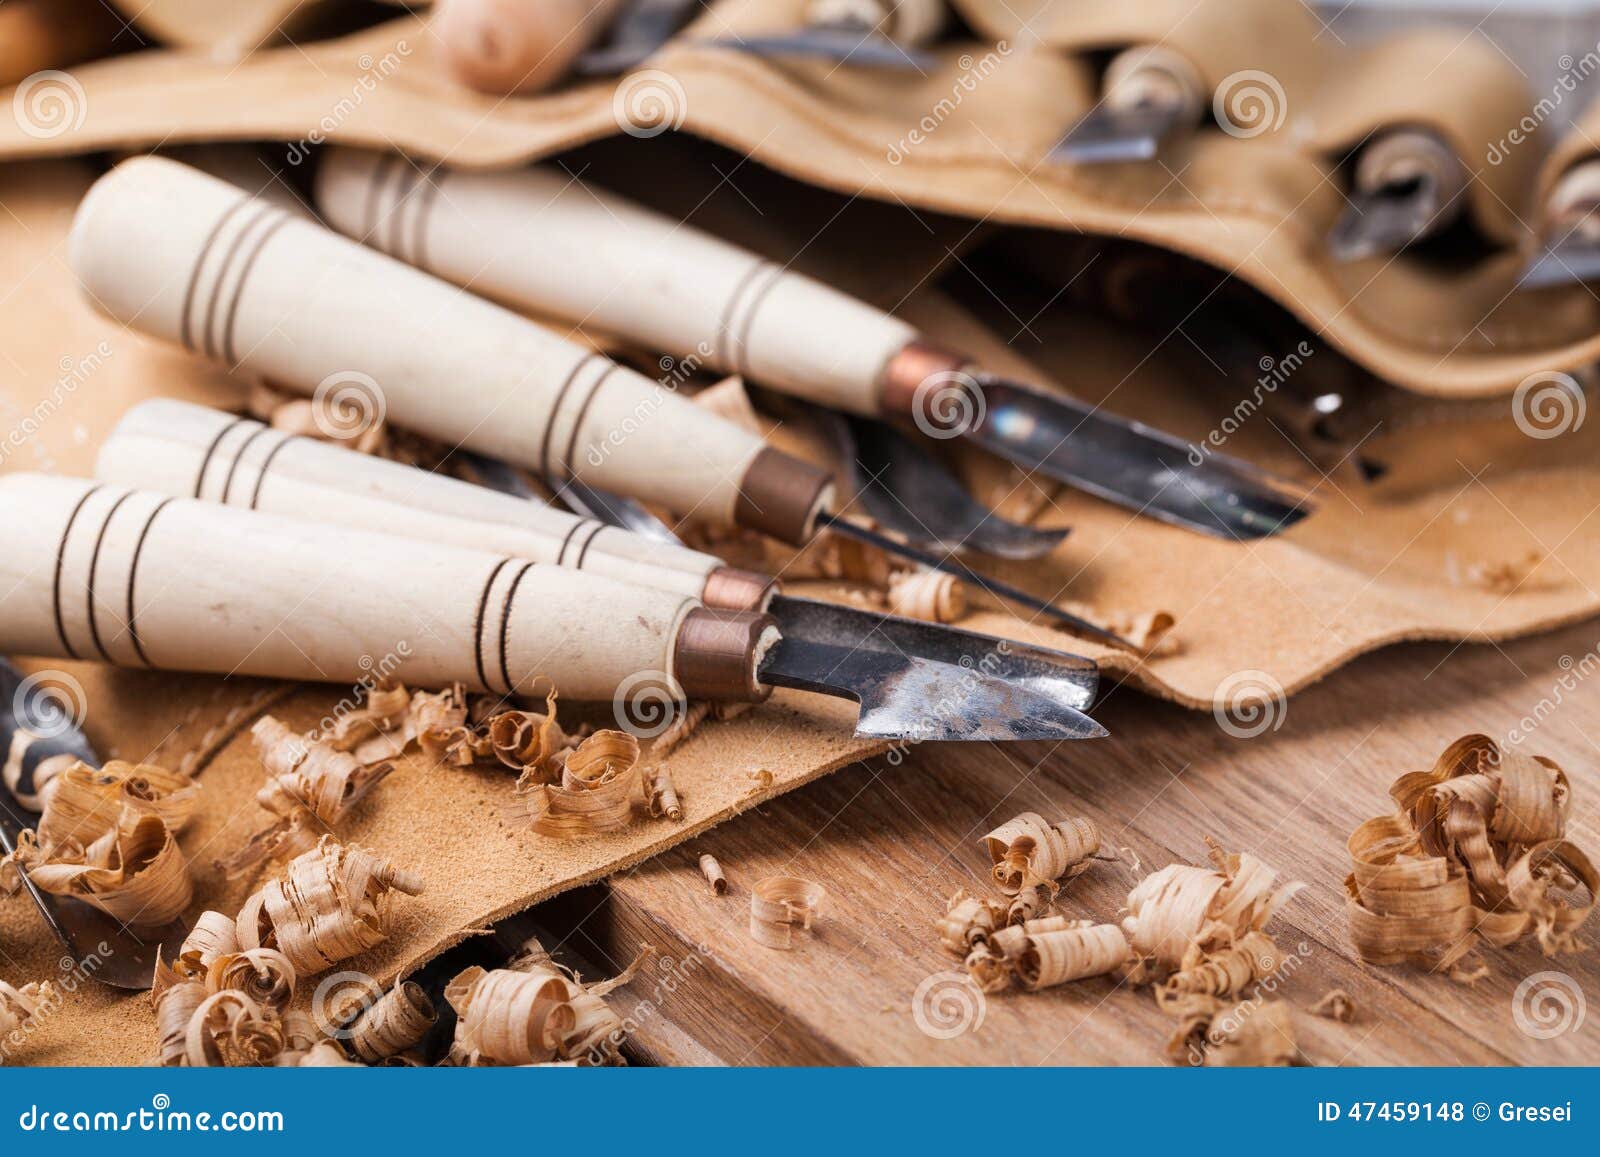 70+ Thousand Carving Tools Royalty-Free Images, Stock Photos